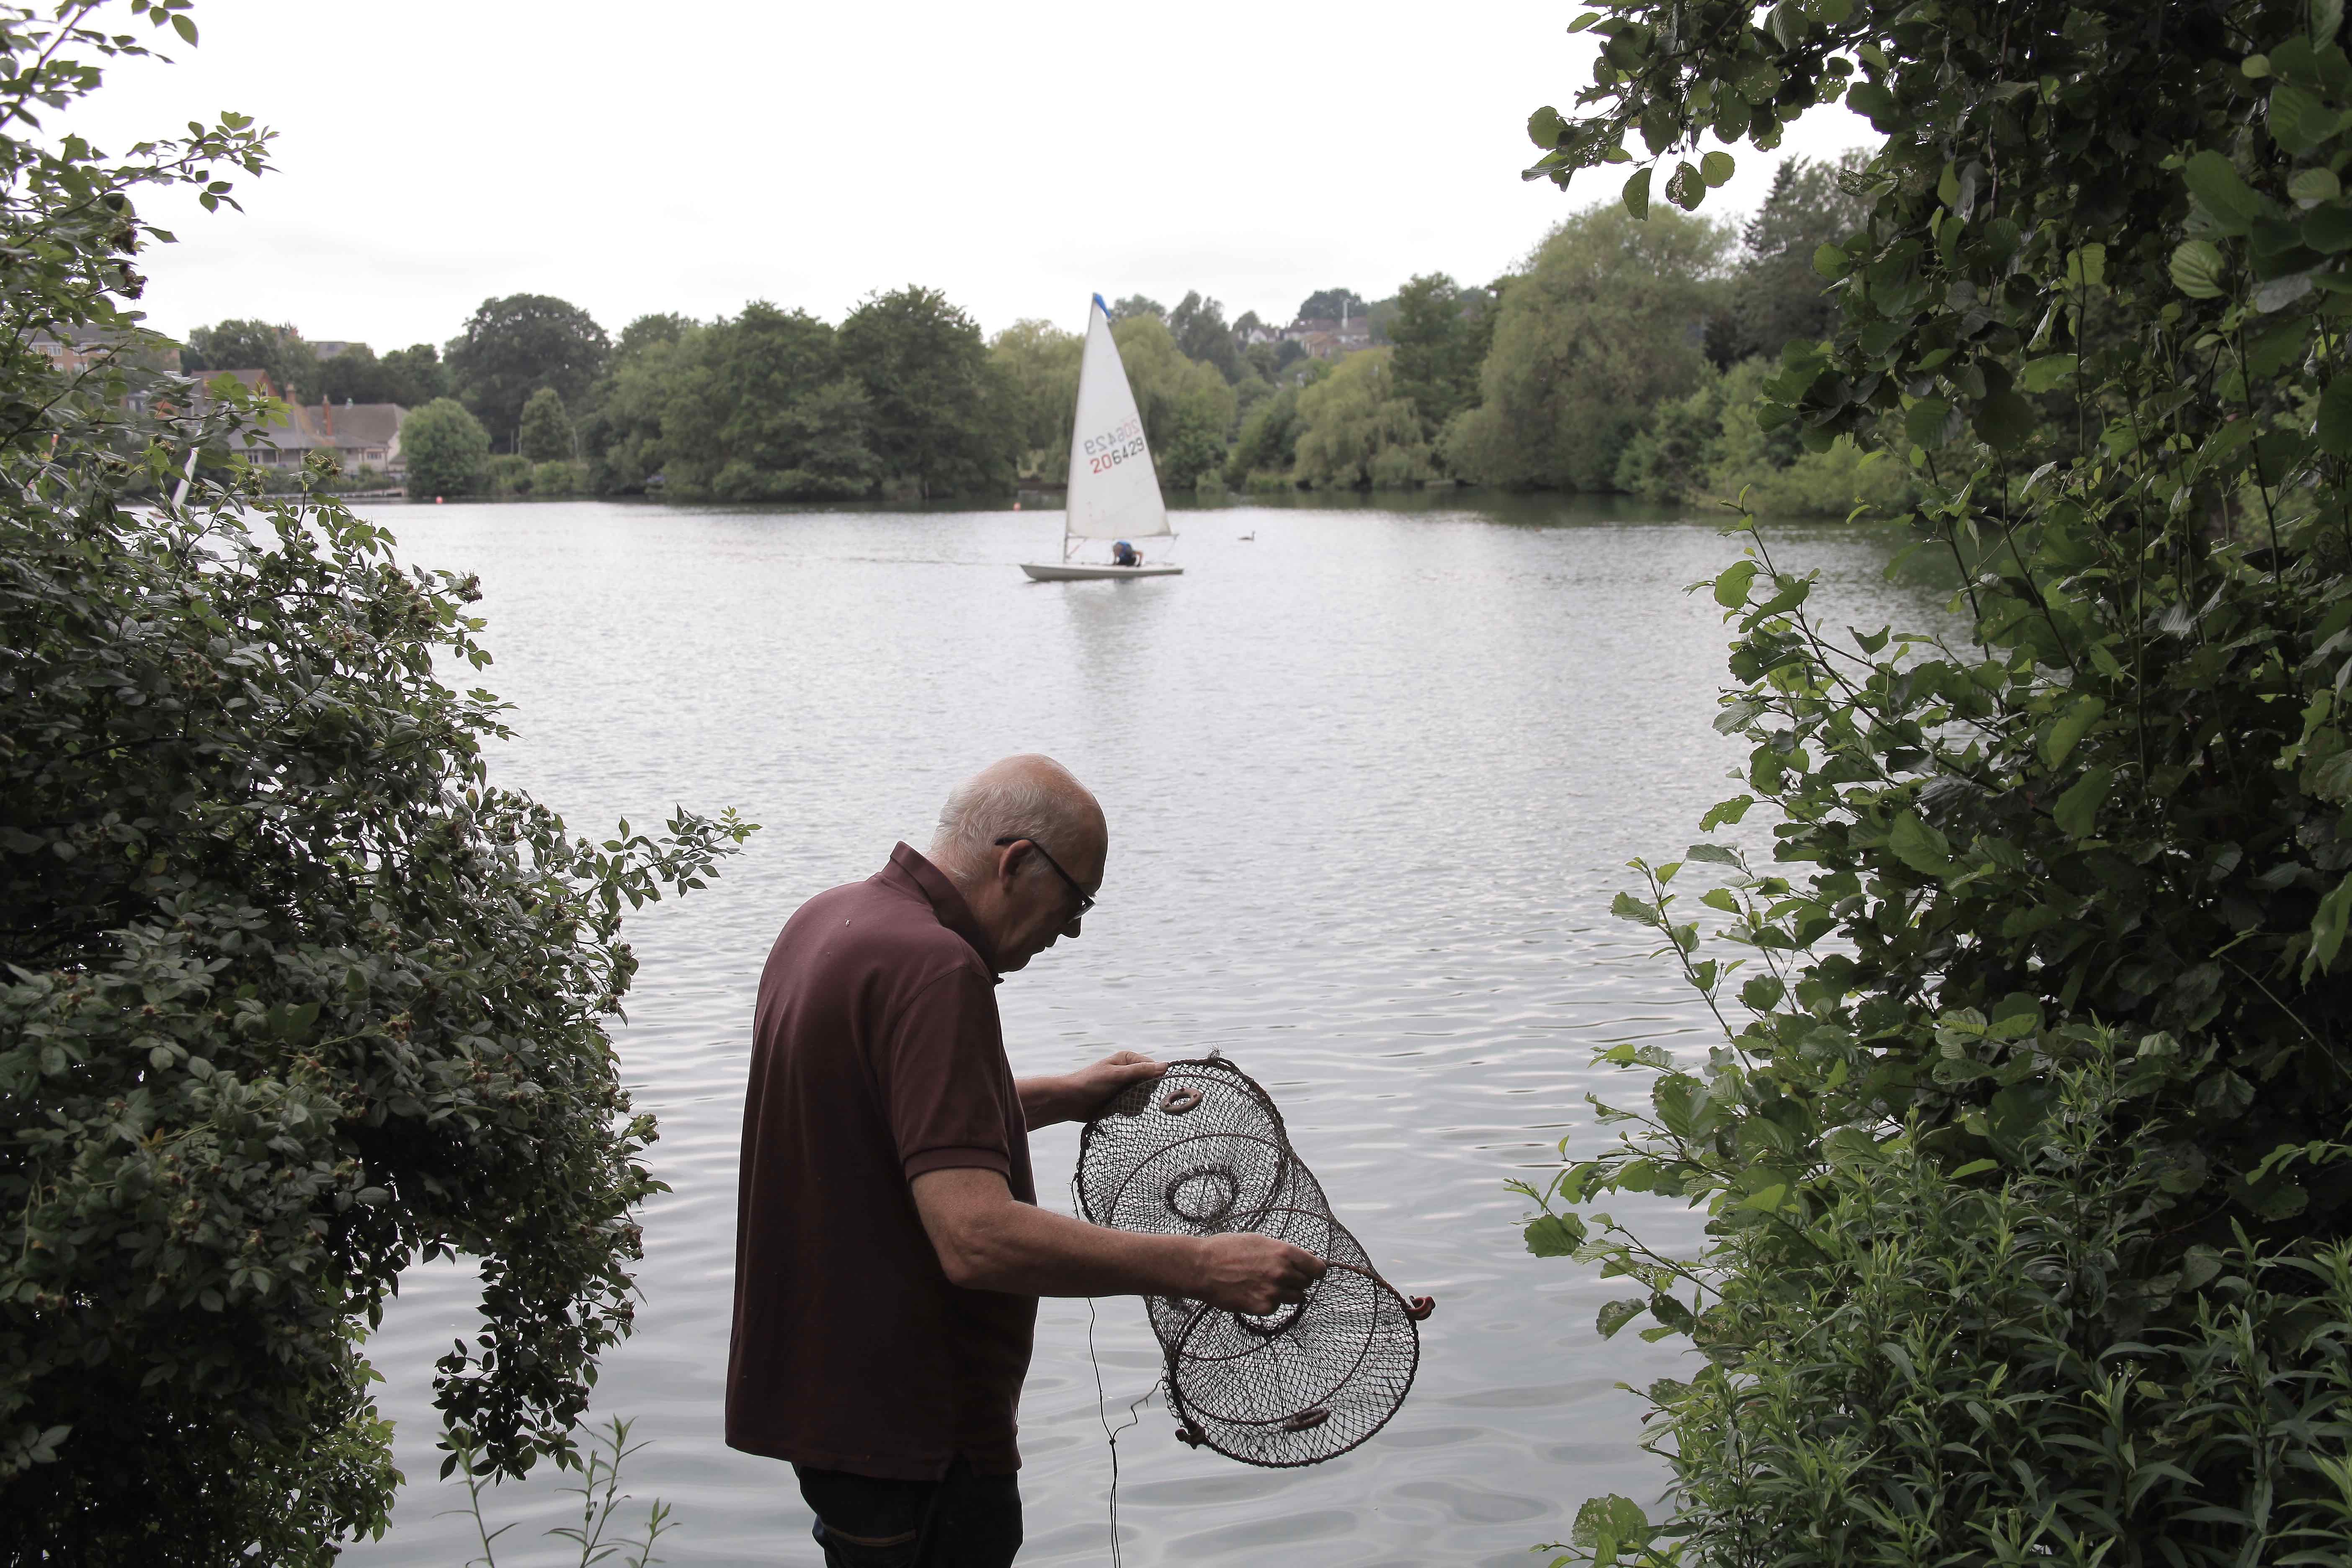 Bob Ring handles a crayfish trap with a lake and sailboat in the background. Photo by Jackie Turner.